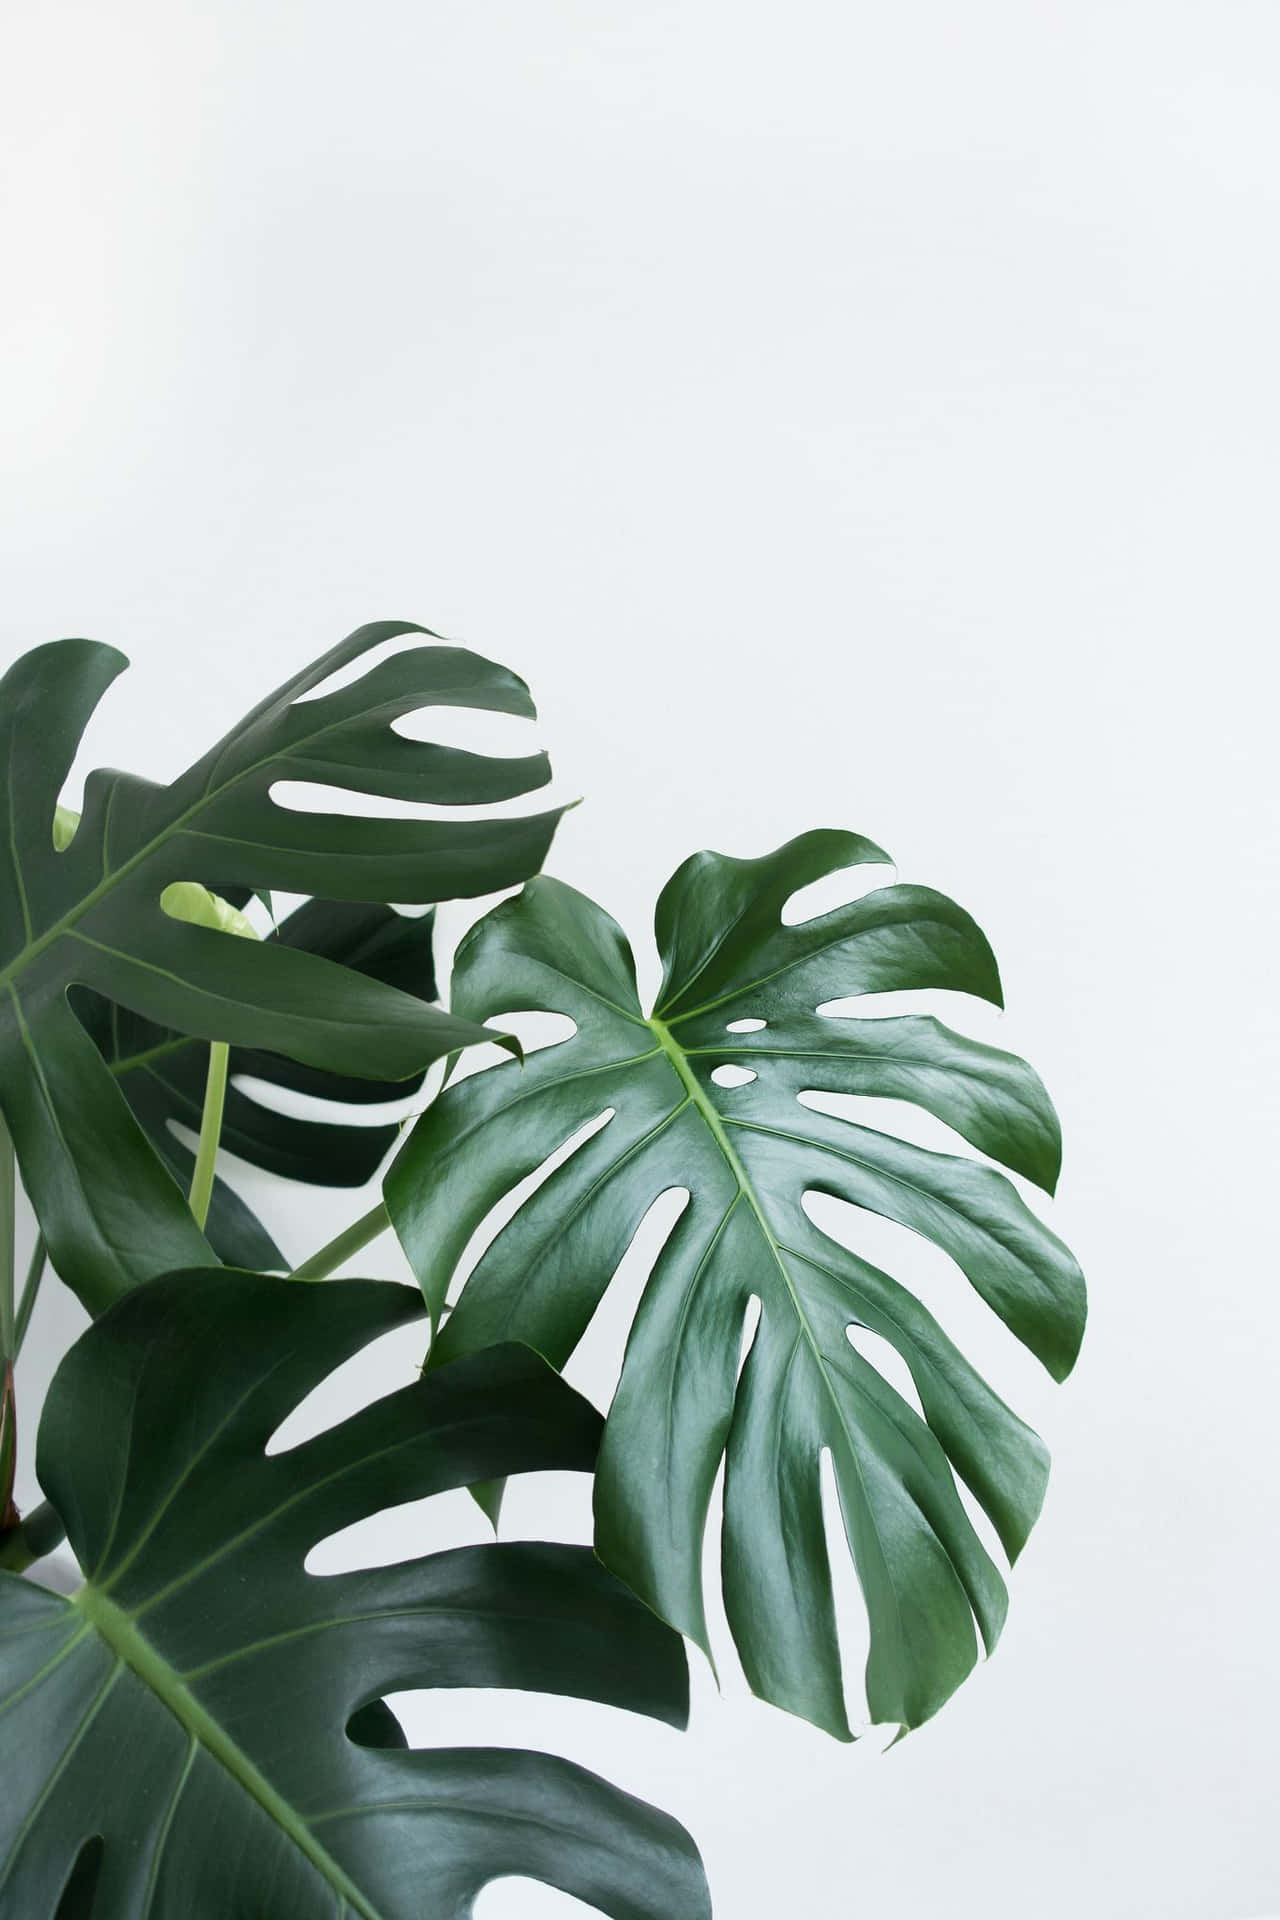 A Large Plant With Large Leaves On A White Background Wallpaper